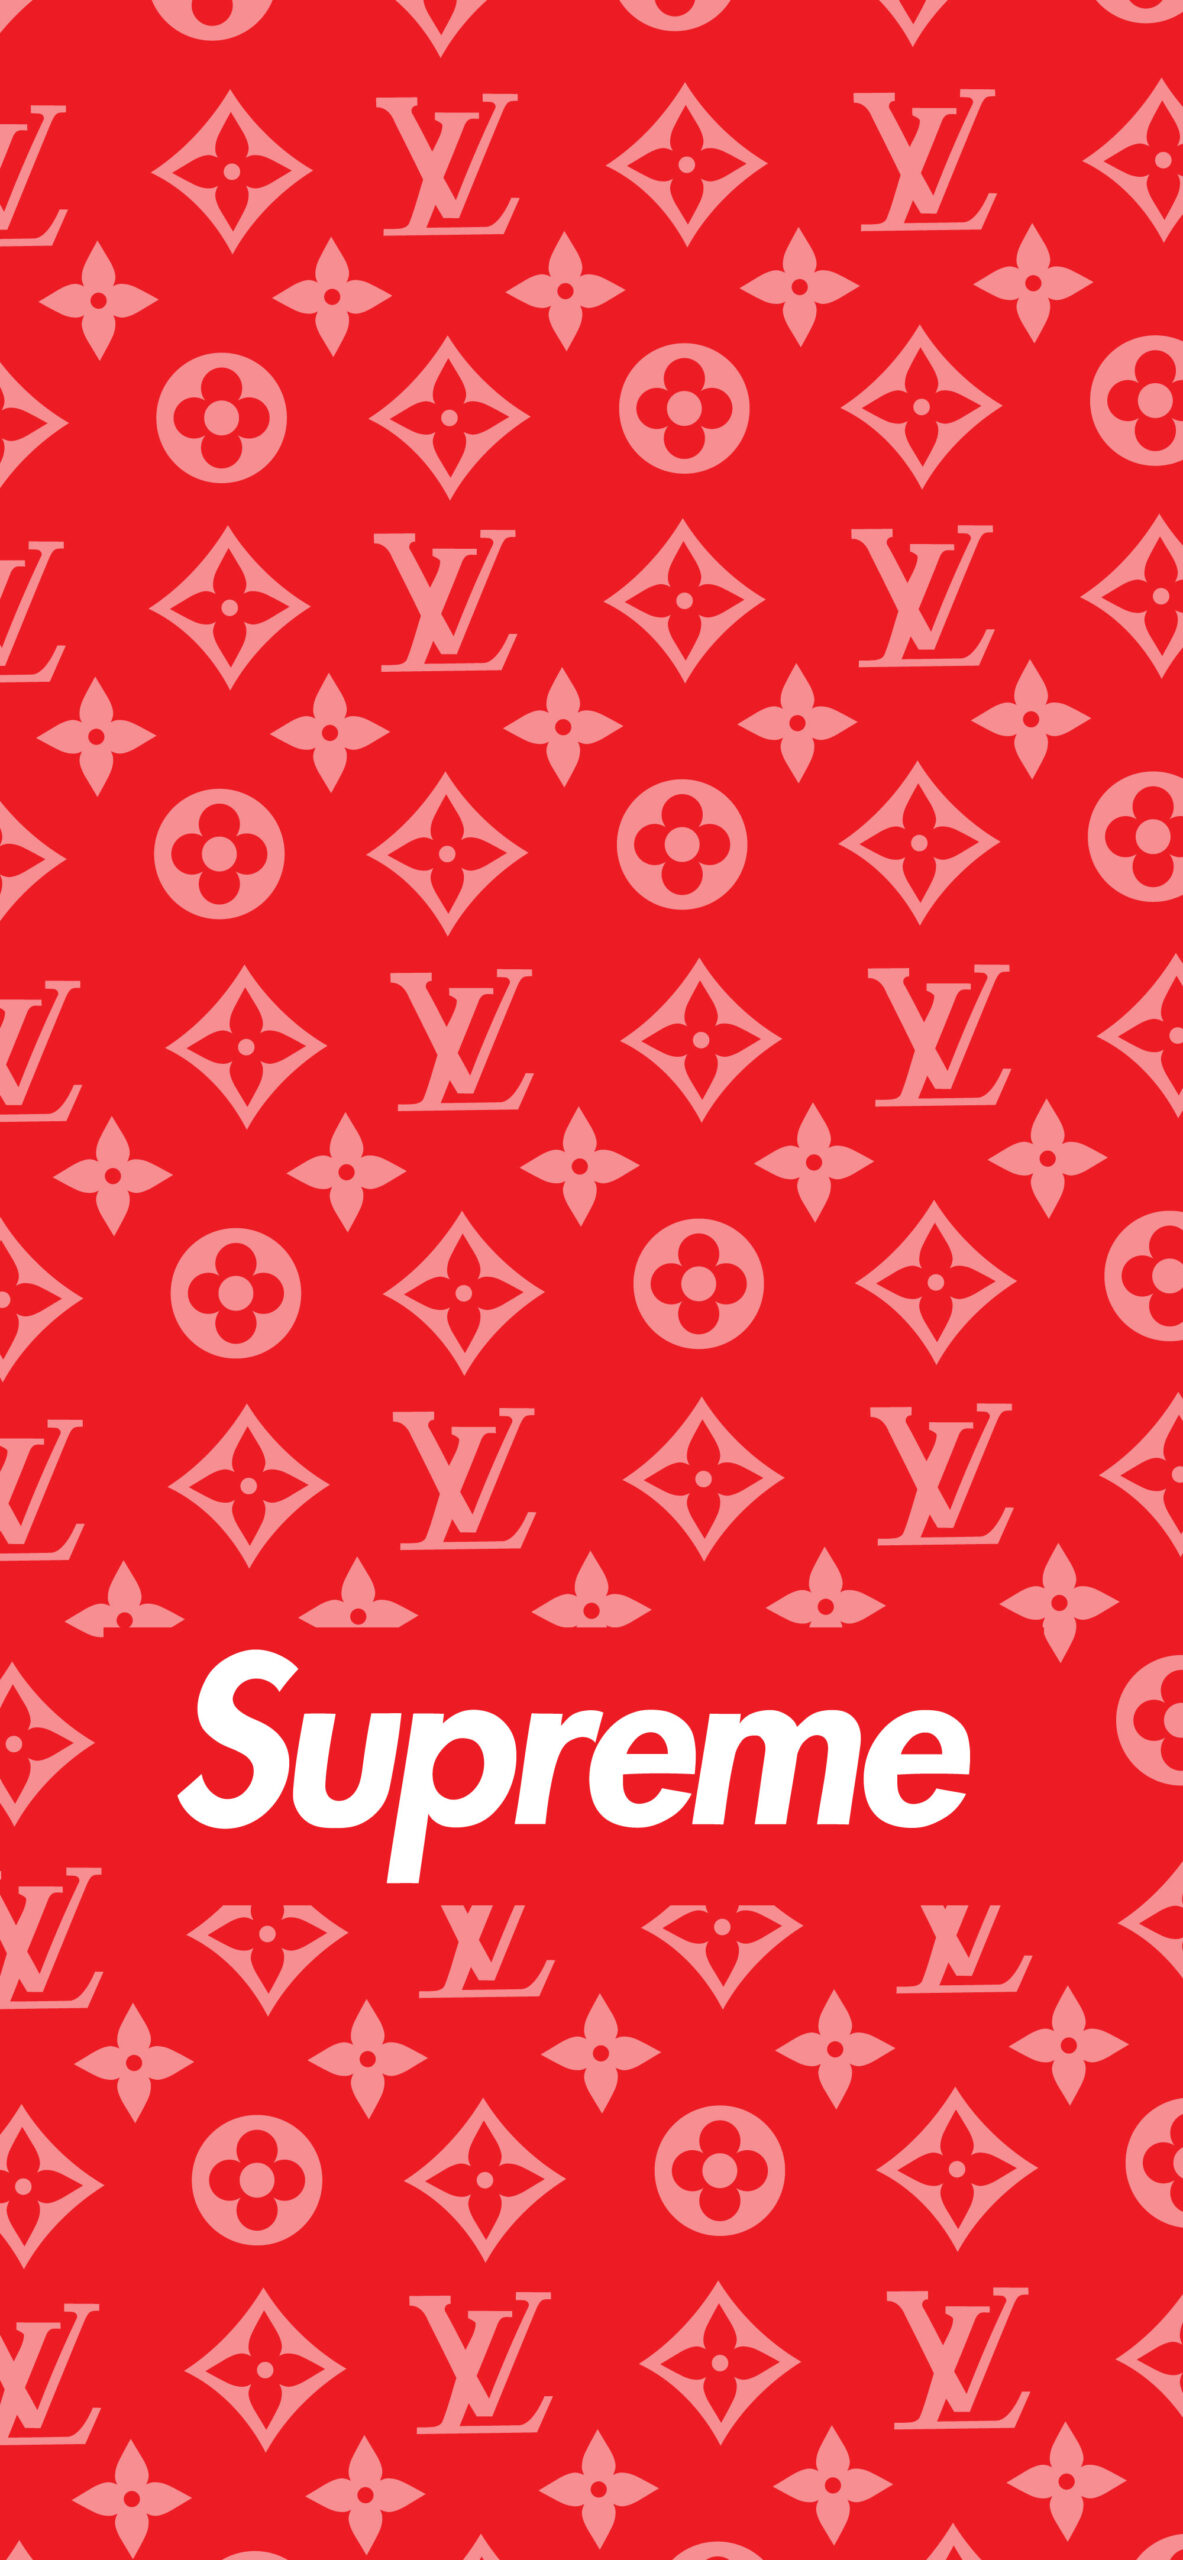 A supreme logo on red background - Red, Louis Vuitton, Supreme